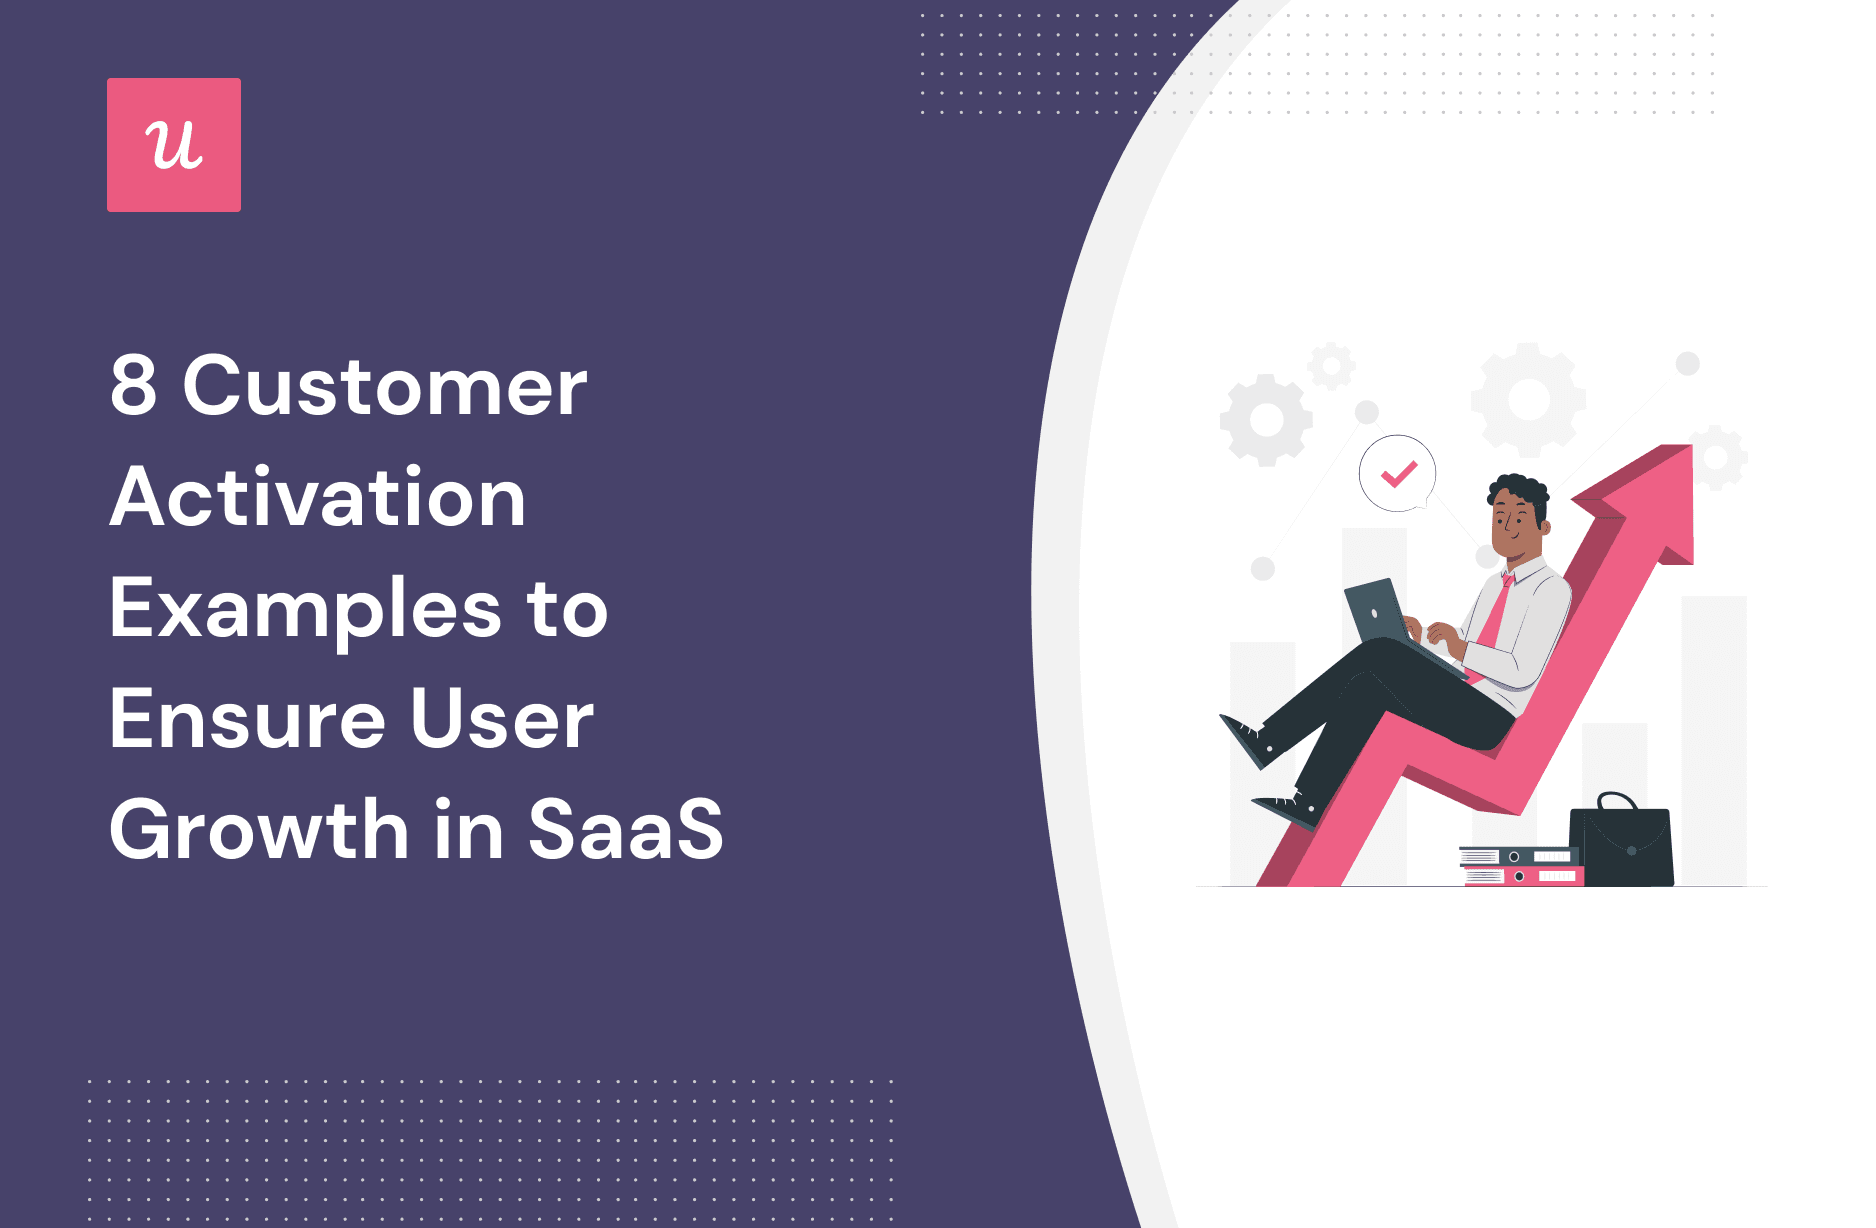 8 Customer Activation Examples to Ensure User Growth in SaaS cover